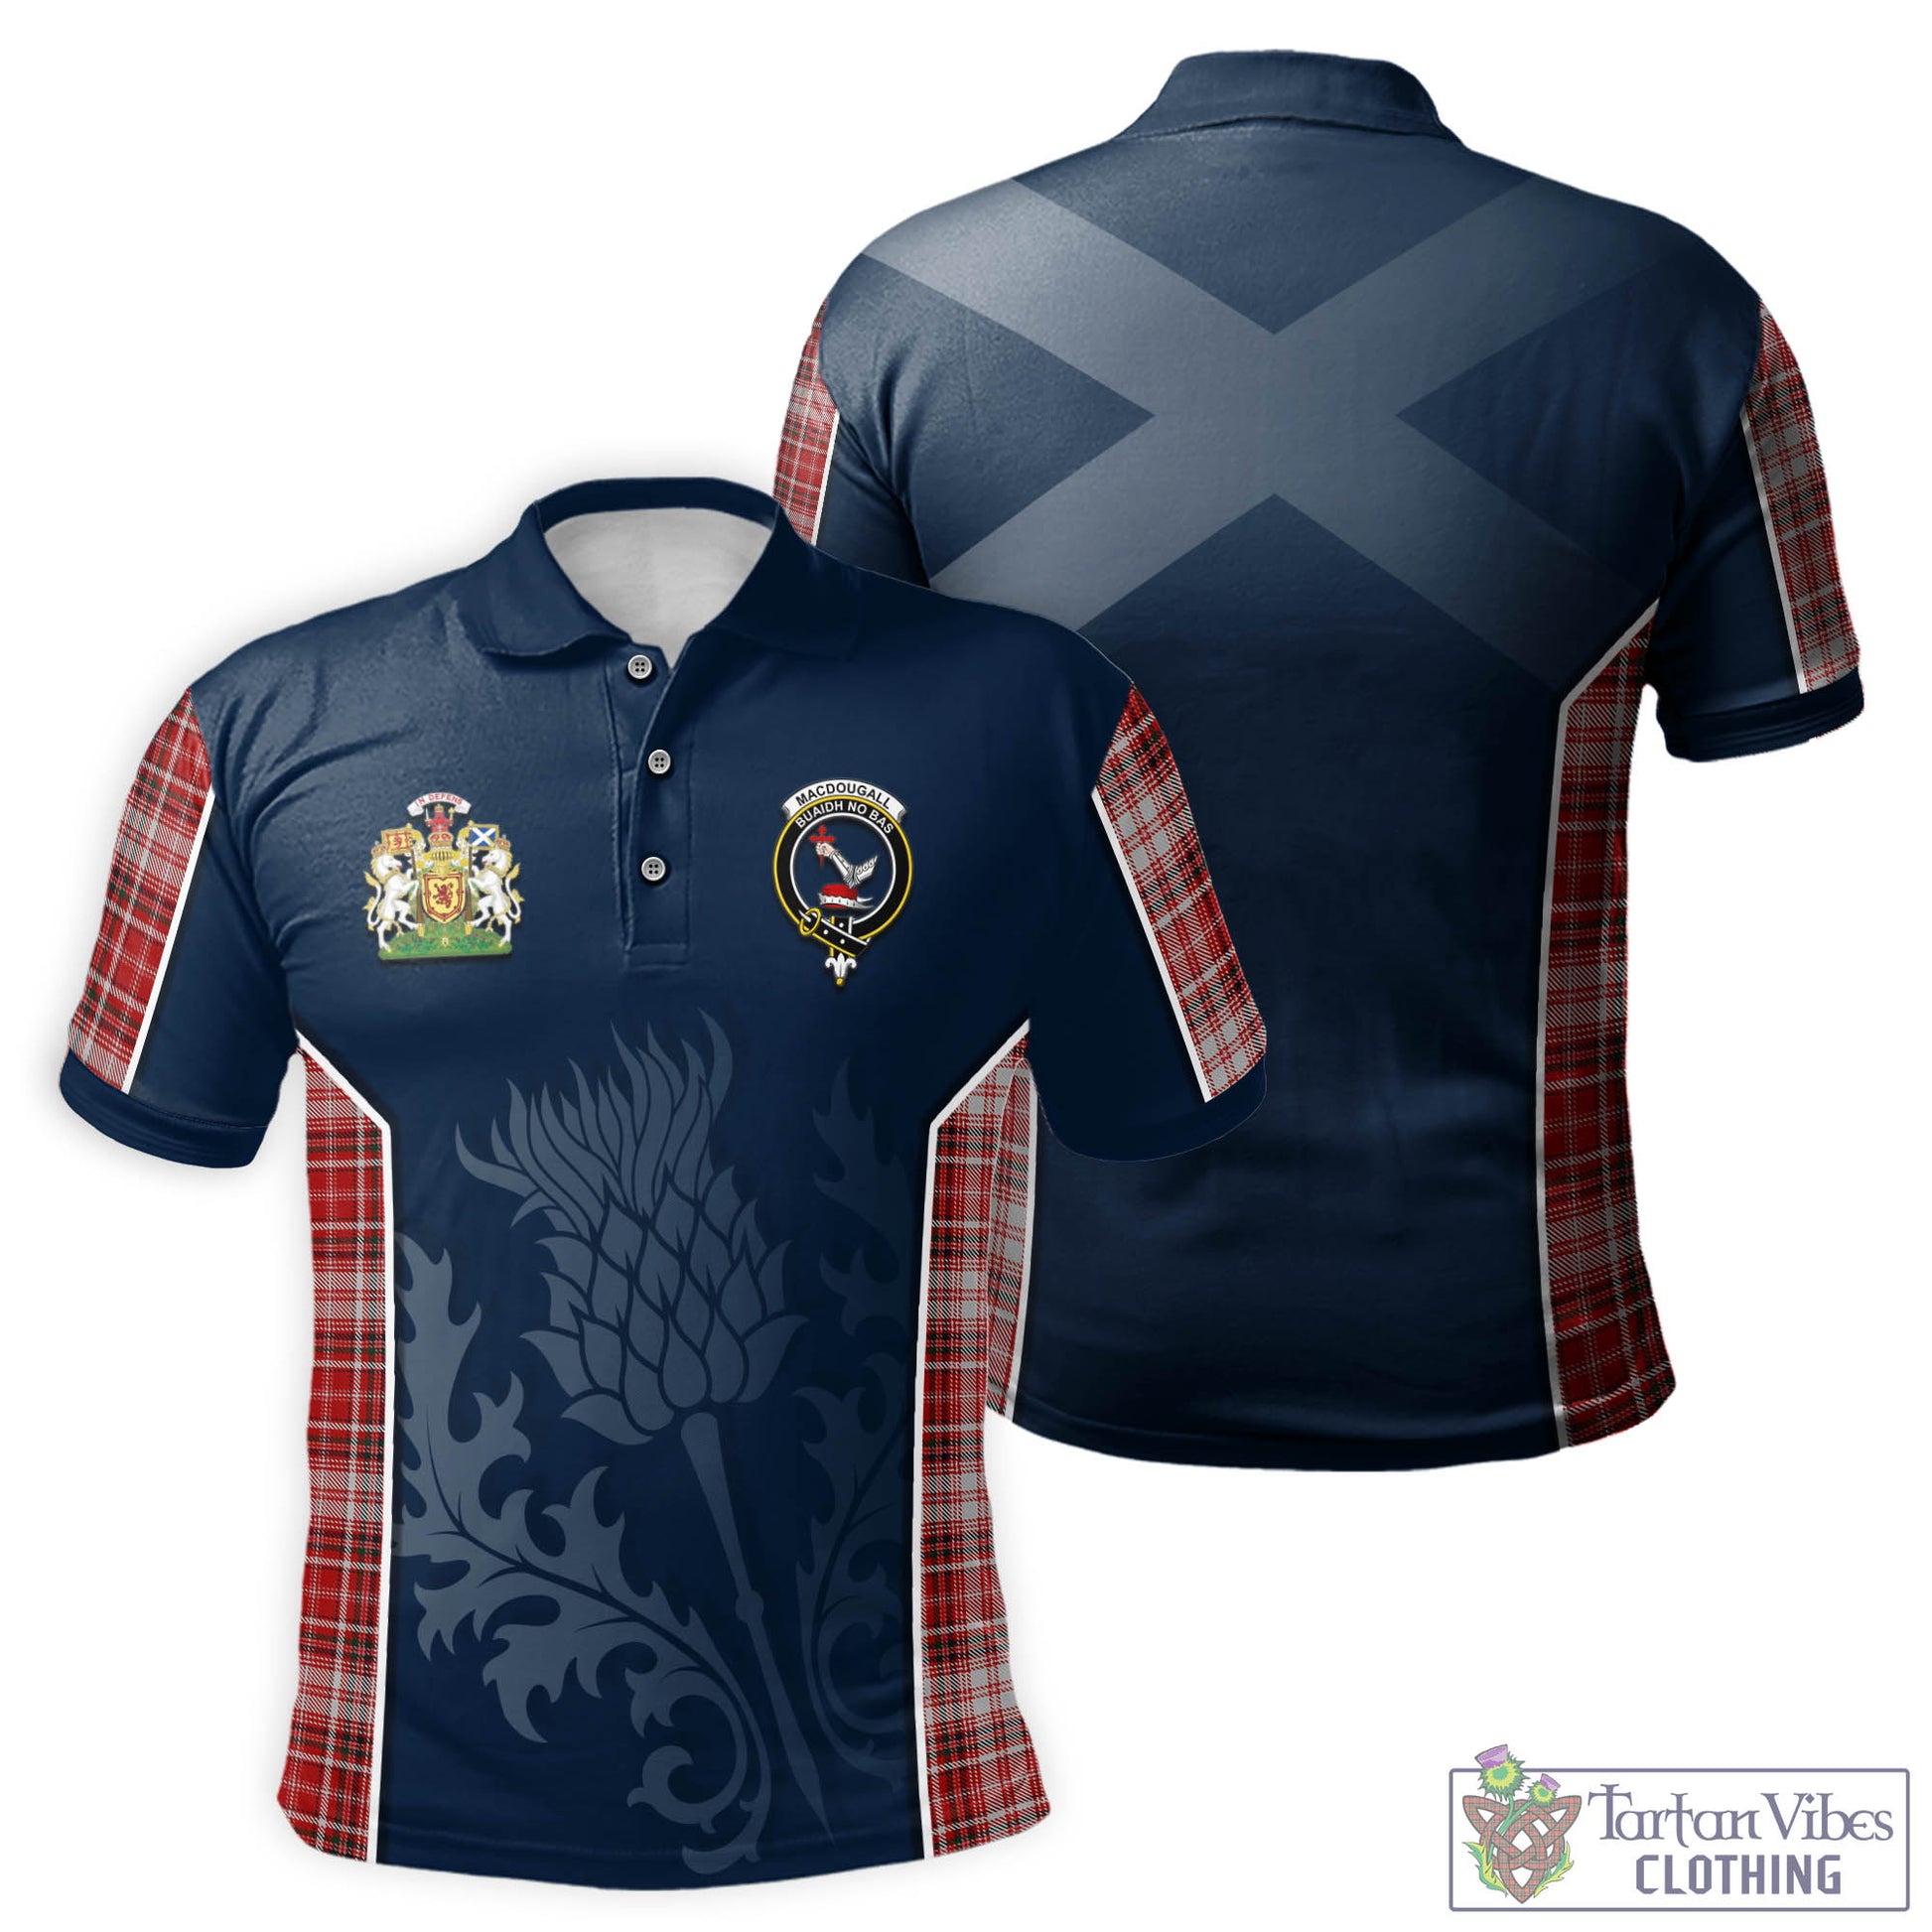 Tartan Vibes Clothing MacDougall Dress Tartan Men's Polo Shirt with Family Crest and Scottish Thistle Vibes Sport Style